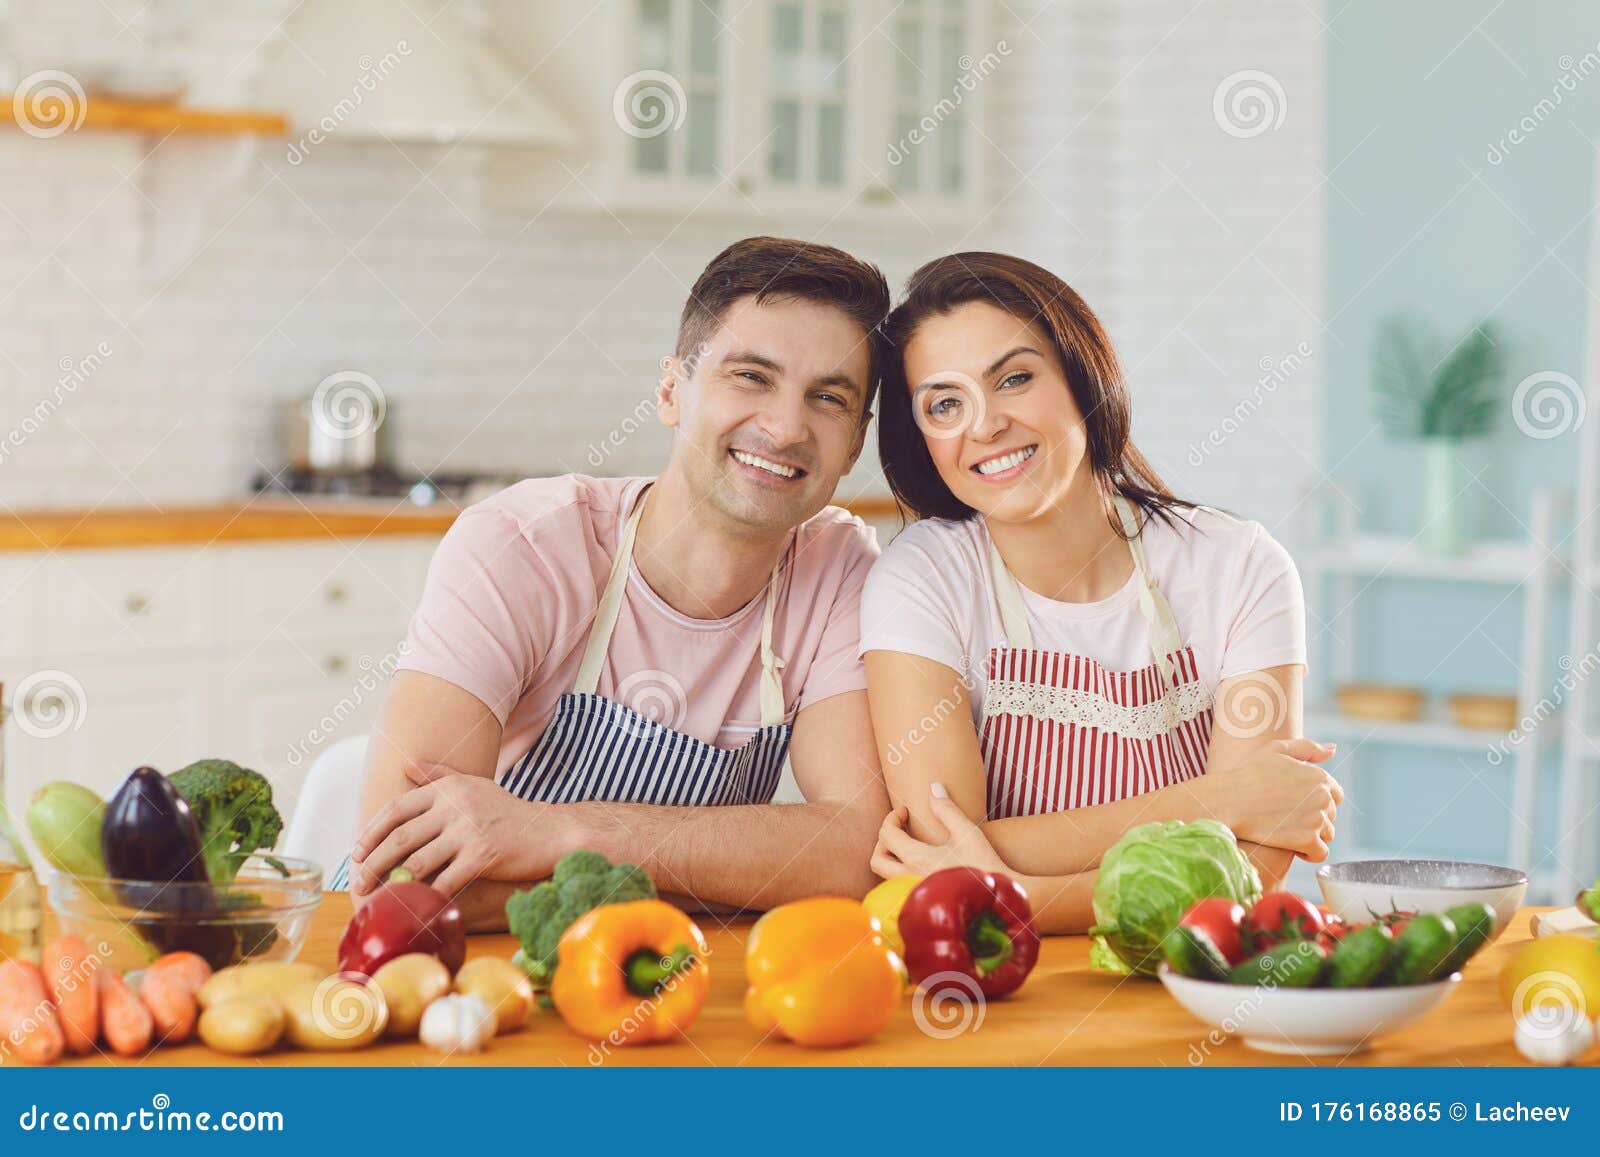 Happy Middle Couple Smiling At A Table With Fresh Vegetables Make Salad